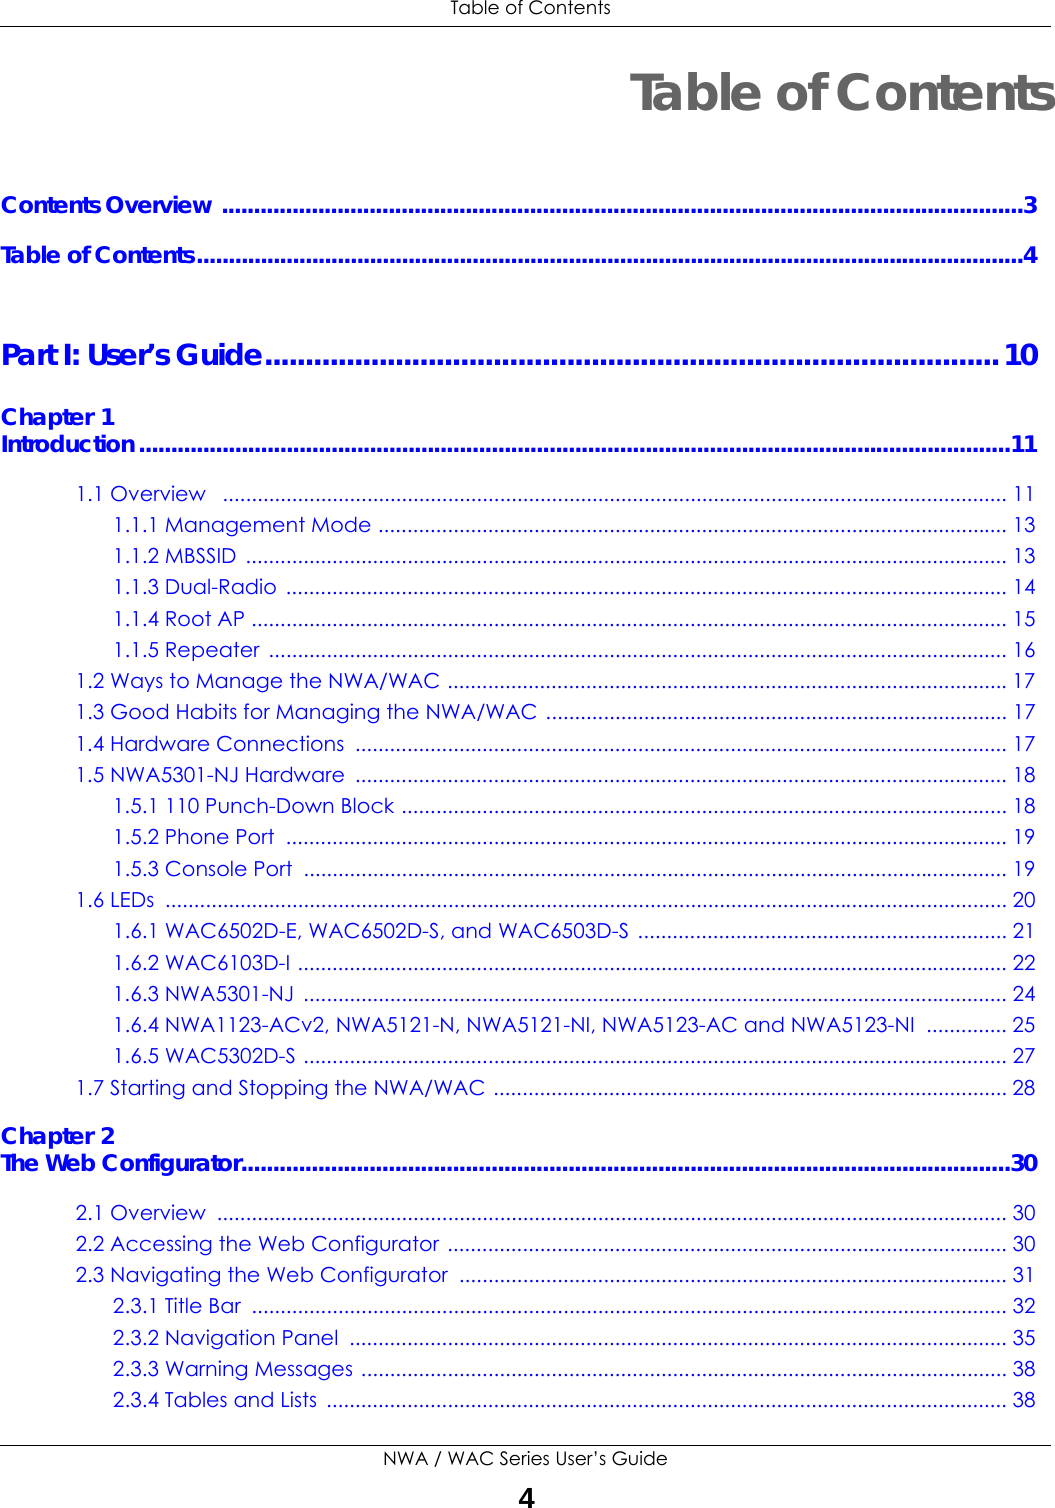  Table of ContentsNWA / WAC Series User’s Guide4Table of ContentsContents Overview .............................................................................................................................3Table of Contents.................................................................................................................................4Part I: User’s Guide..........................................................................................10Chapter 1Introduction ........................................................................................................................................111.1 Overview   ........................................................................................................................................ 111.1.1 Management Mode ............................................................................................................. 131.1.2 MBSSID  .................................................................................................................................... 131.1.3 Dual-Radio  ............................................................................................................................. 141.1.4 Root AP ................................................................................................................................... 151.1.5 Repeater  ................................................................................................................................ 161.2 Ways to Manage the NWA/WAC .................................................................................................171.3 Good Habits for Managing the NWA/WAC ................................................................................ 171.4 Hardware Connections  ................................................................................................................. 171.5 NWA5301-NJ Hardware  ................................................................................................................. 181.5.1 110 Punch-Down Block ......................................................................................................... 181.5.2 Phone Port  ............................................................................................................................. 191.5.3 Console Port  .......................................................................................................................... 191.6 LEDs  .................................................................................................................................................. 201.6.1 WAC6502D-E, WAC6502D-S, and WAC6503D-S  ................................................................ 211.6.2 WAC6103D-I ........................................................................................................................... 221.6.3 NWA5301-NJ  .......................................................................................................................... 241.6.4 NWA1123-ACv2, NWA5121-N, NWA5121-NI, NWA5123-AC and NWA5123-NI  .............. 251.6.5 WAC5302D-S .......................................................................................................................... 271.7 Starting and Stopping the NWA/WAC ......................................................................................... 28Chapter 2The Web Configurator........................................................................................................................302.1 Overview  ......................................................................................................................................... 302.2 Accessing the Web Configurator ................................................................................................. 302.3 Navigating the Web Configurator  ............................................................................................... 312.3.1 Title Bar  ................................................................................................................................... 322.3.2 Navigation Panel  .................................................................................................................. 352.3.3 Warning Messages ................................................................................................................ 382.3.4 Tables and Lists  ...................................................................................................................... 38